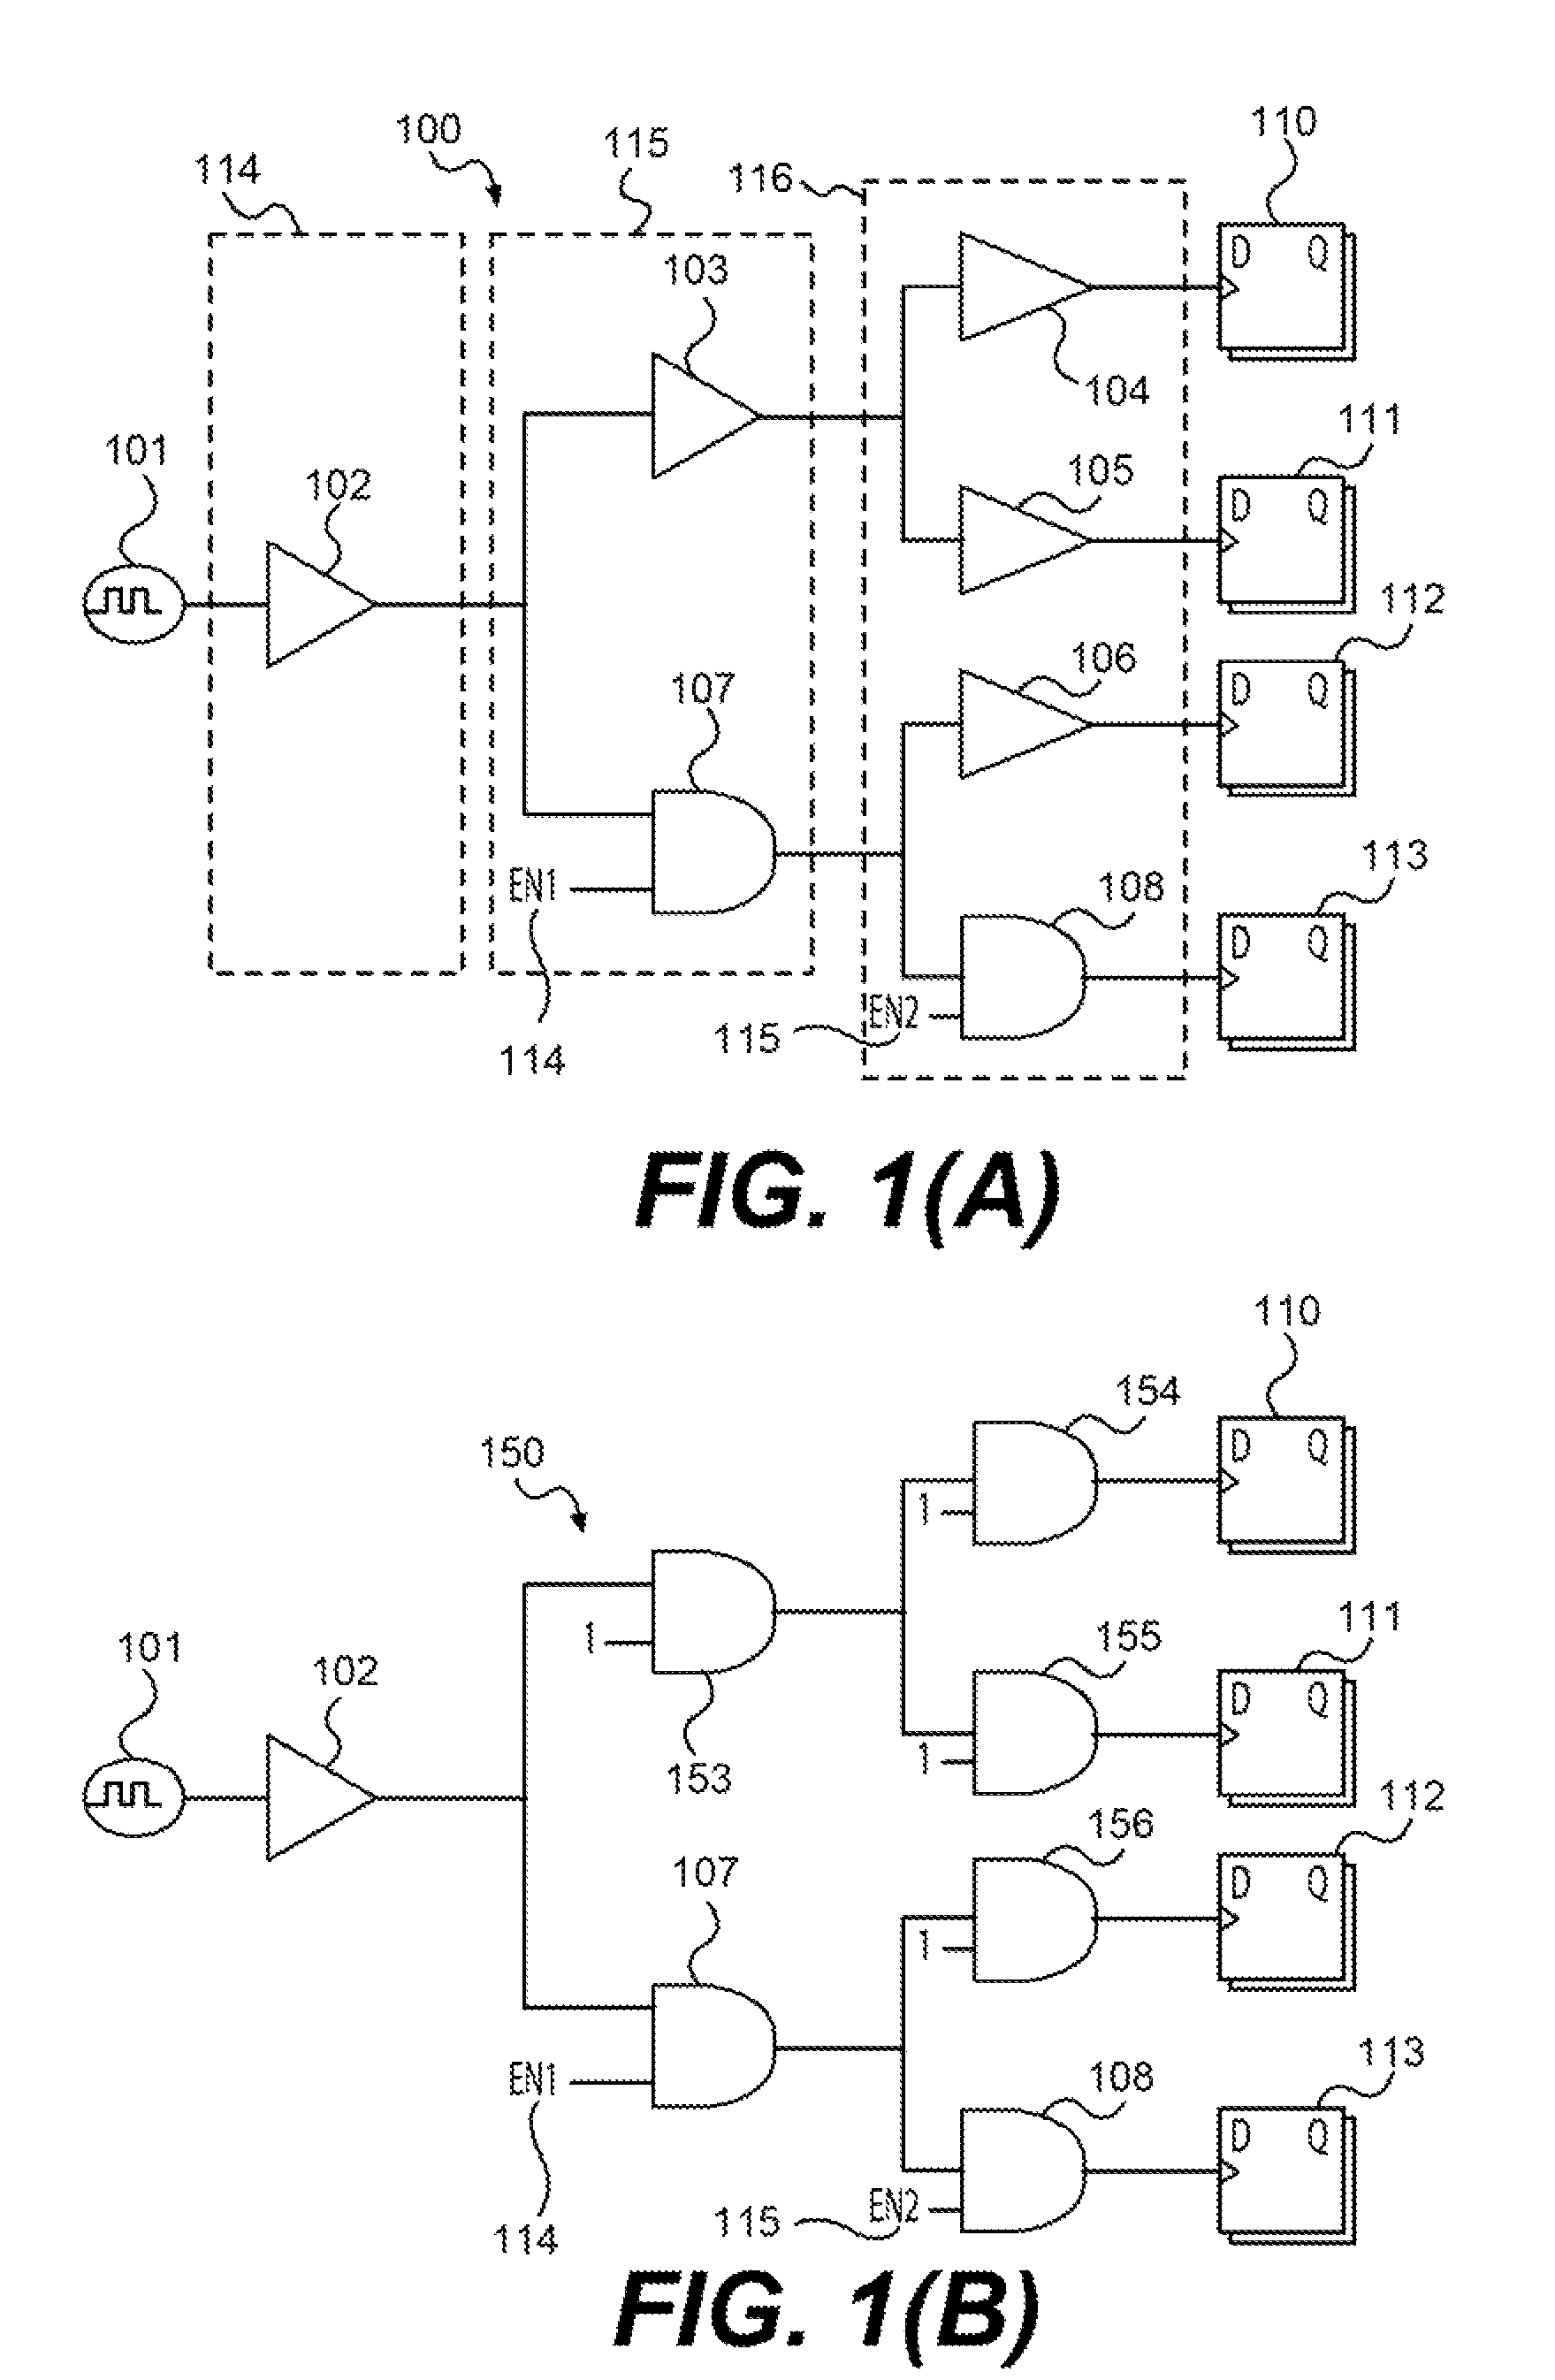 Methods and systems for reducing clock skew in a gated clock tree